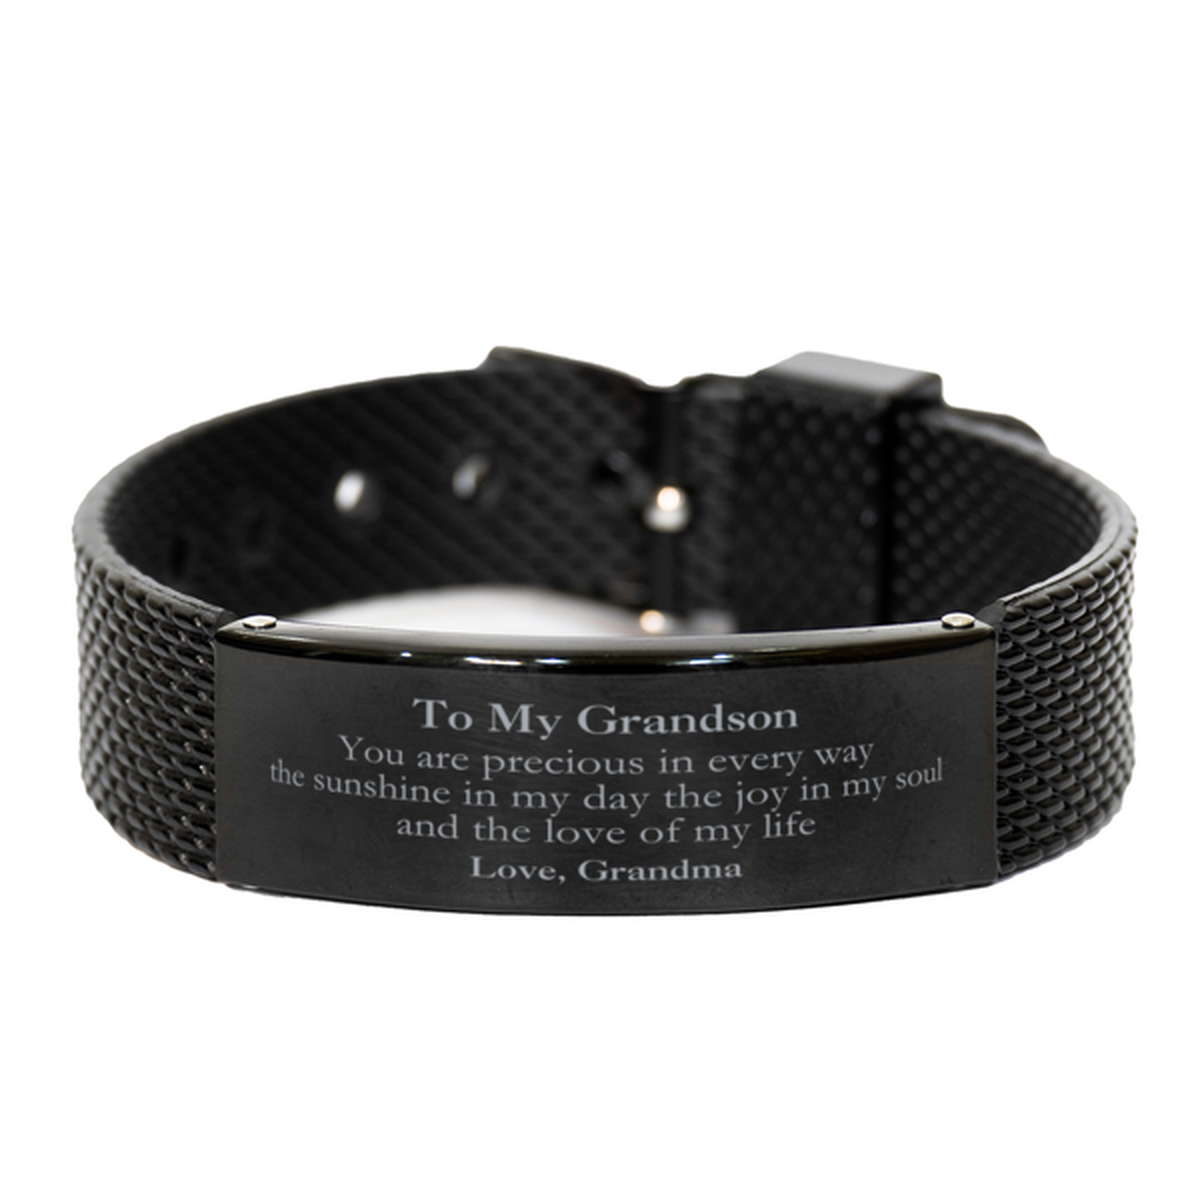 Graduation Gifts for Grandson Black Shark Mesh Bracelet Present from Grandma, Christmas Grandson Birthday Gifts Grandson You are precious in every way the sunshine in my day. Love, Grandma